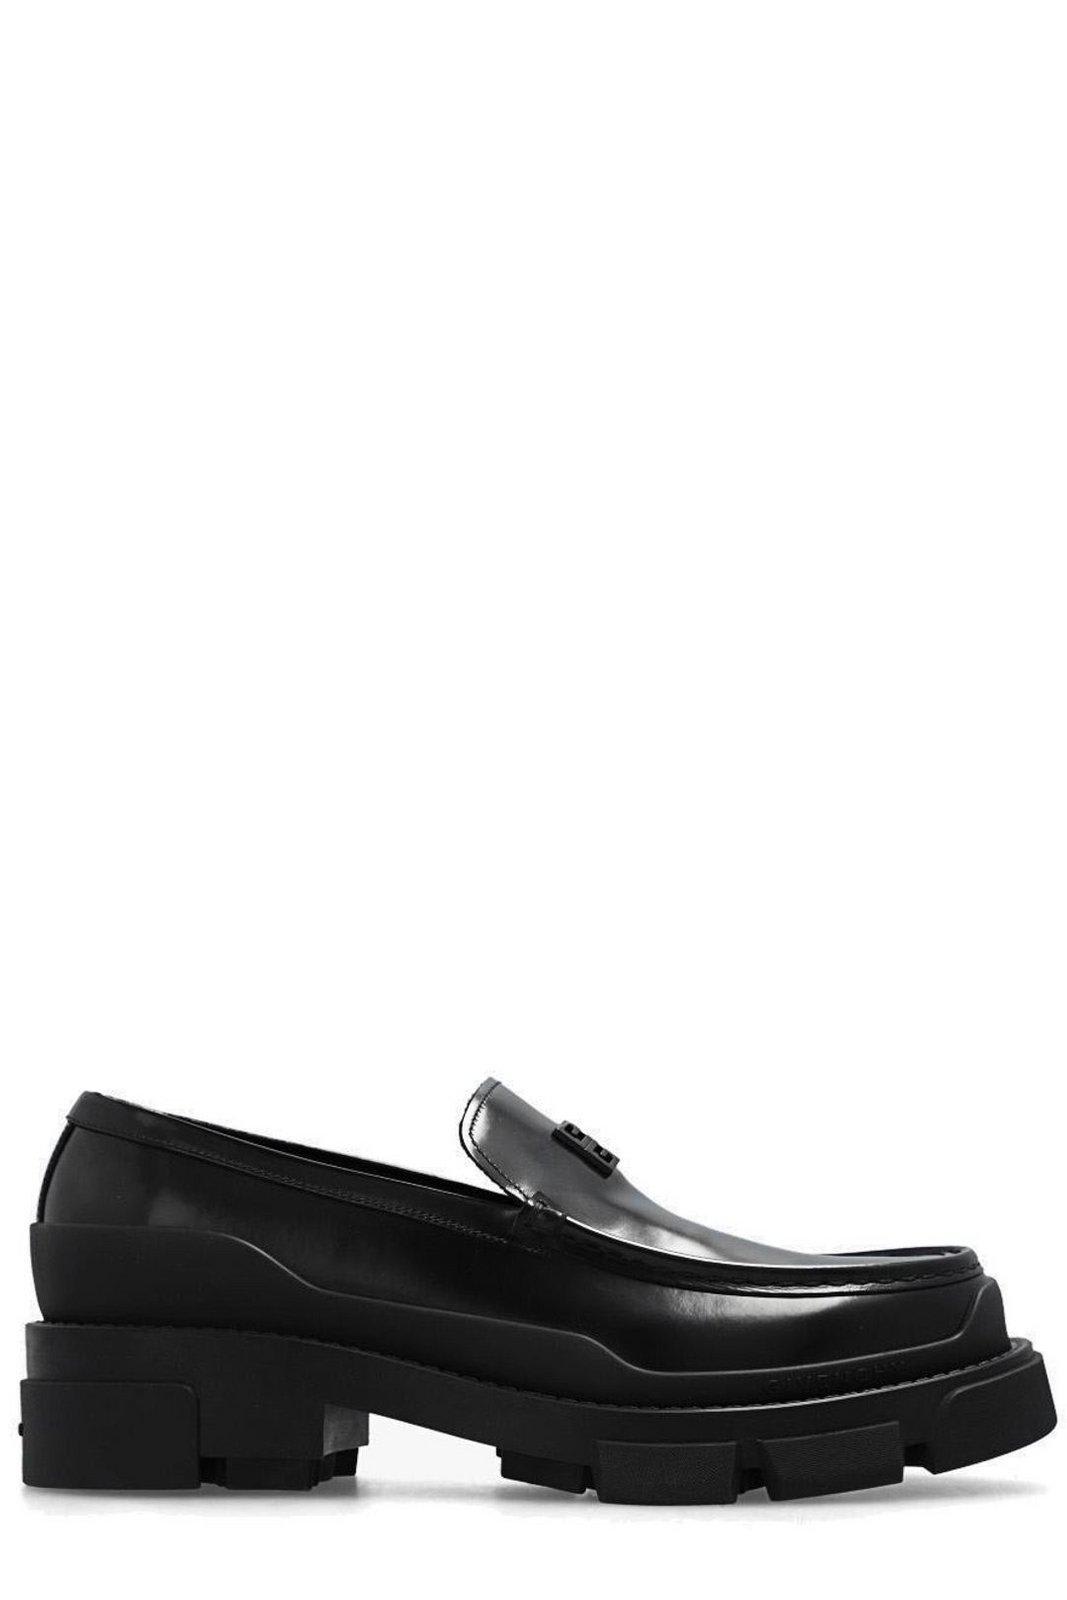 GIVENCHY TERRA LOAFERS